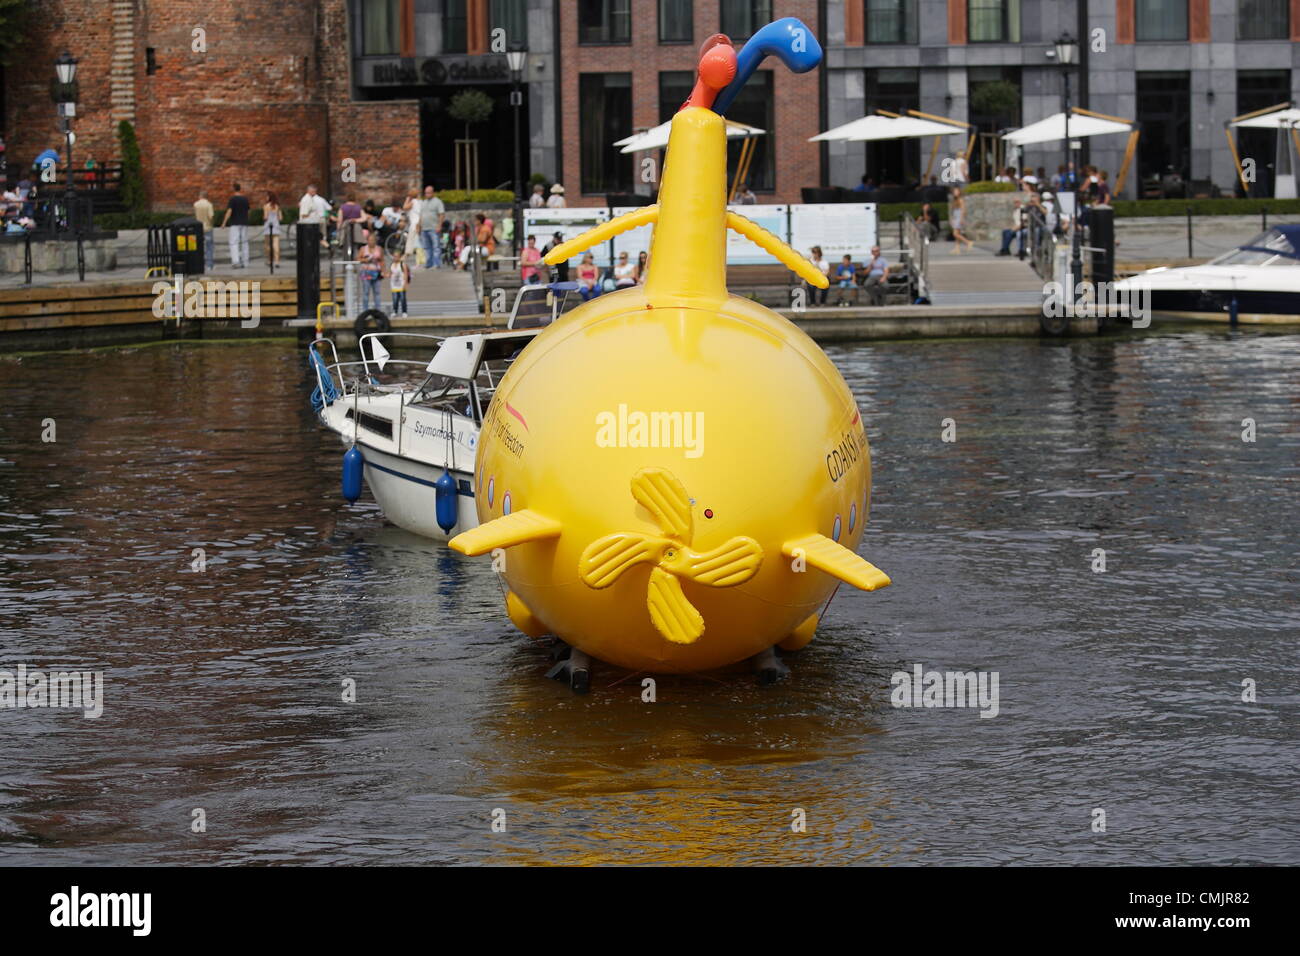 Gdansk, Poland 18th, August 2012 Yellow Submarine on the Motlawa River. Performance organised in the 50th anniversary of the first The Beatles concert with historical band members. Yellow Submarine is one of the events of the 'Week of the Legend - Gdansk's The Beatles jubilee'. Stock Photo